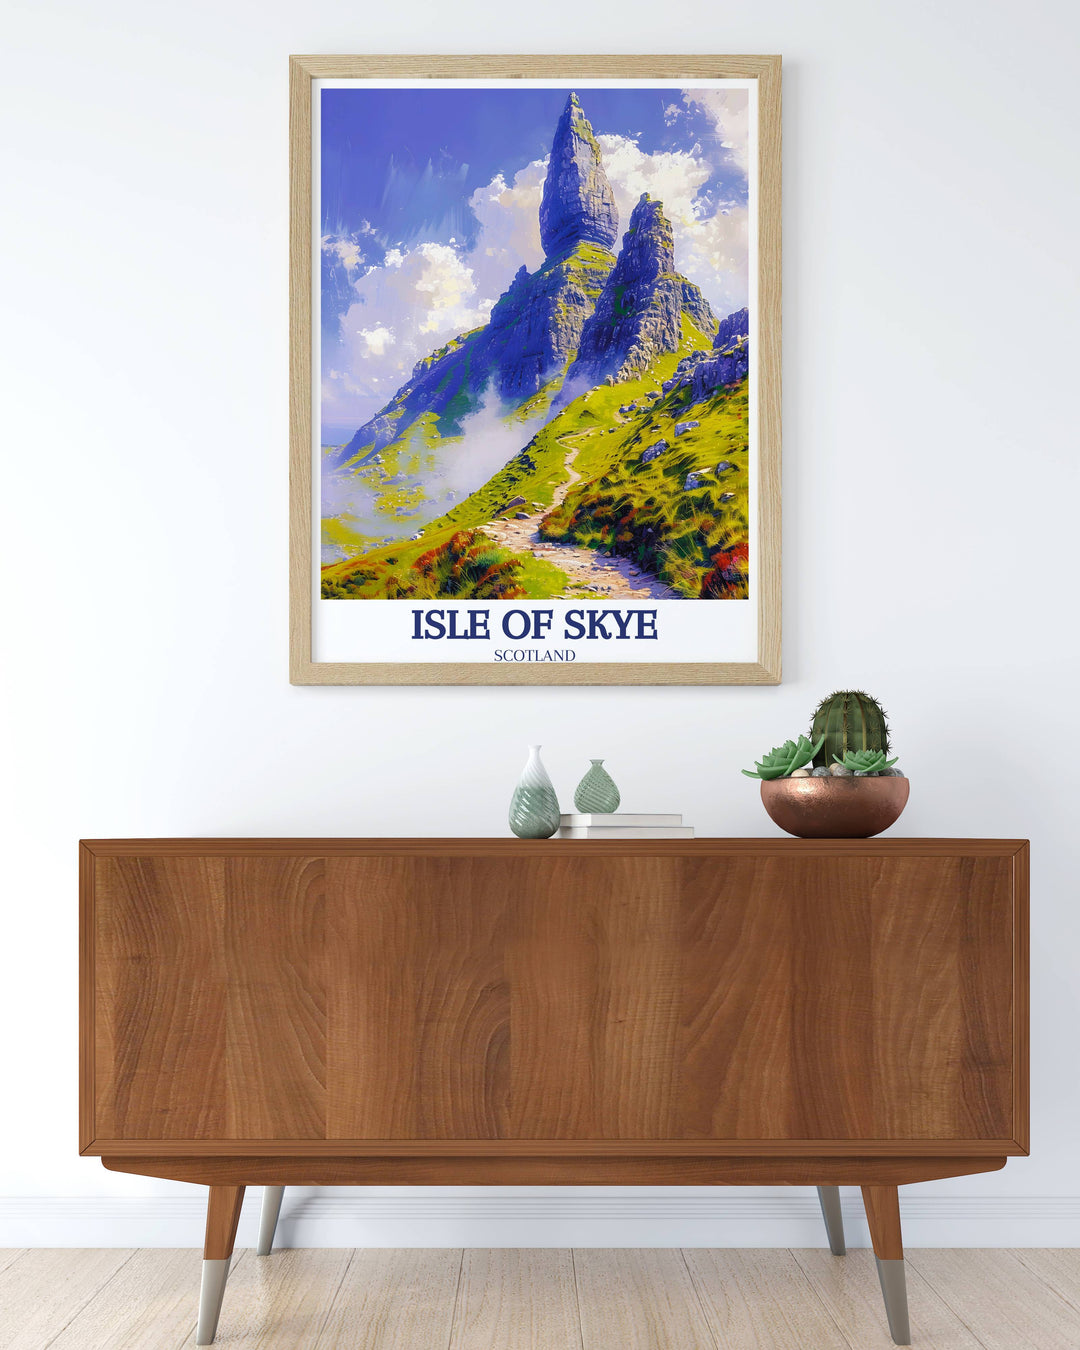 A serene Isle of Skye art print showcasing the lush, green surroundings of The Storr, ideal for nature lovers wanting to bring a piece of tranquil Scottish scenery indoors.